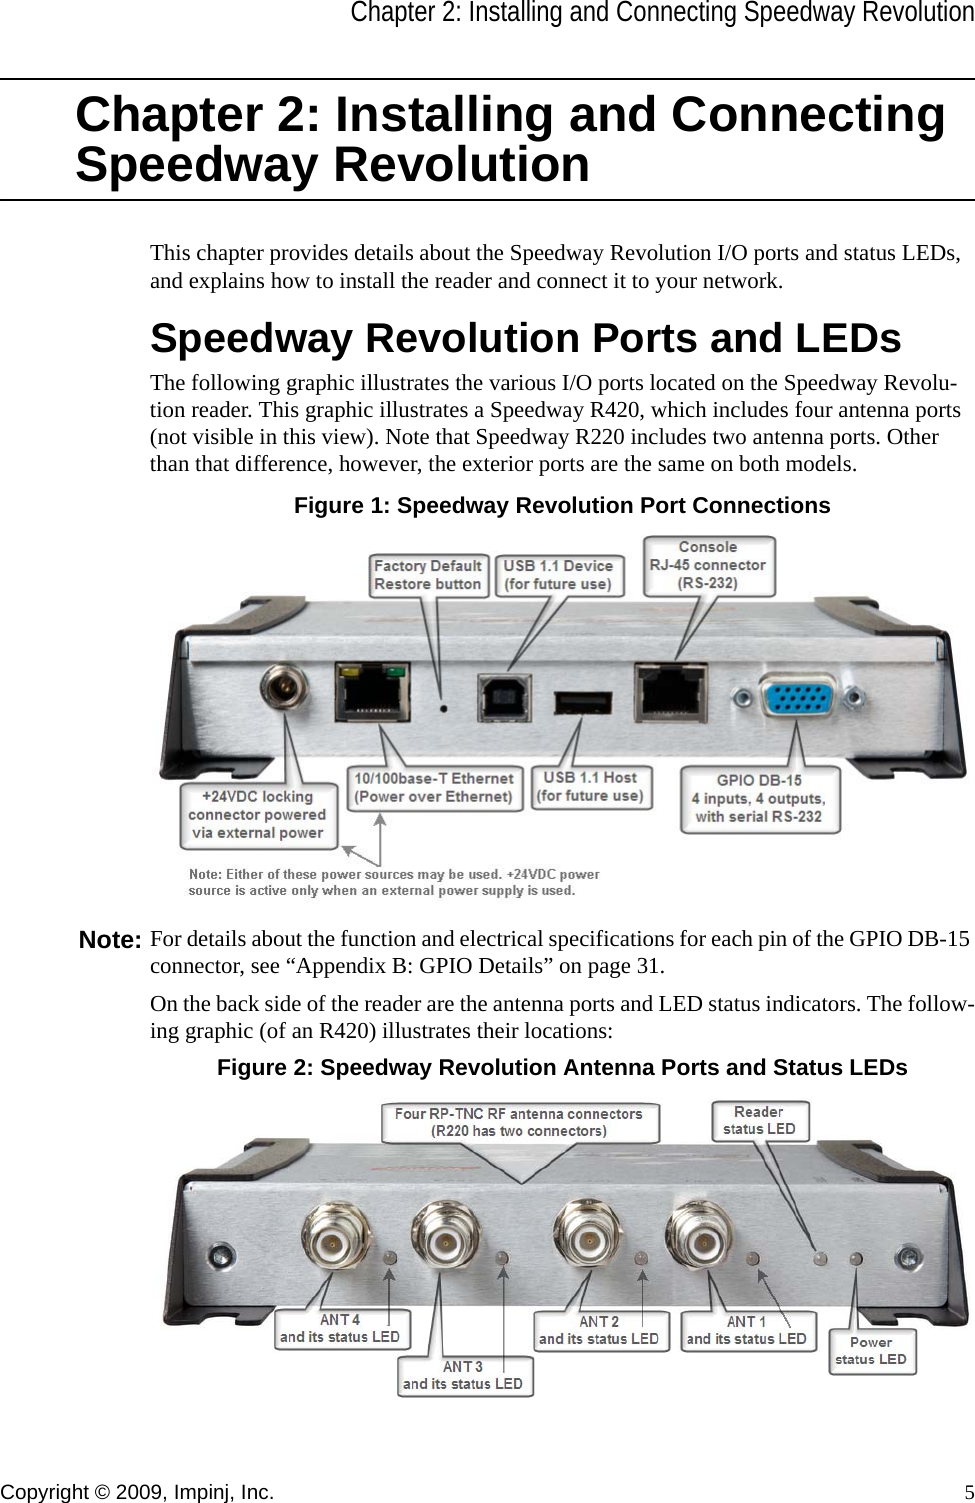 Chapter 2: Installing and Connecting Speedway RevolutionCopyright © 2009, Impinj, Inc. 5Chapter 2: Installing and Connecting Speedway RevolutionThis chapter provides details about the Speedway Revolution I/O ports and status LEDs, and explains how to install the reader and connect it to your network.Speedway Revolution Ports and LEDsThe following graphic illustrates the various I/O ports located on the Speedway Revolu-tion reader. This graphic illustrates a Speedway R420, which includes four antenna ports (not visible in this view). Note that Speedway R220 includes two antenna ports. Other than that difference, however, the exterior ports are the same on both models.Figure 1: Speedway Revolution Port ConnectionsNote: For details about the function and electrical specifications for each pin of the GPIO DB-15 connector, see “Appendix B: GPIO Details” on page 31.On the back side of the reader are the antenna ports and LED status indicators. The follow-ing graphic (of an R420) illustrates their locations:Figure 2: Speedway Revolution Antenna Ports and Status LEDs